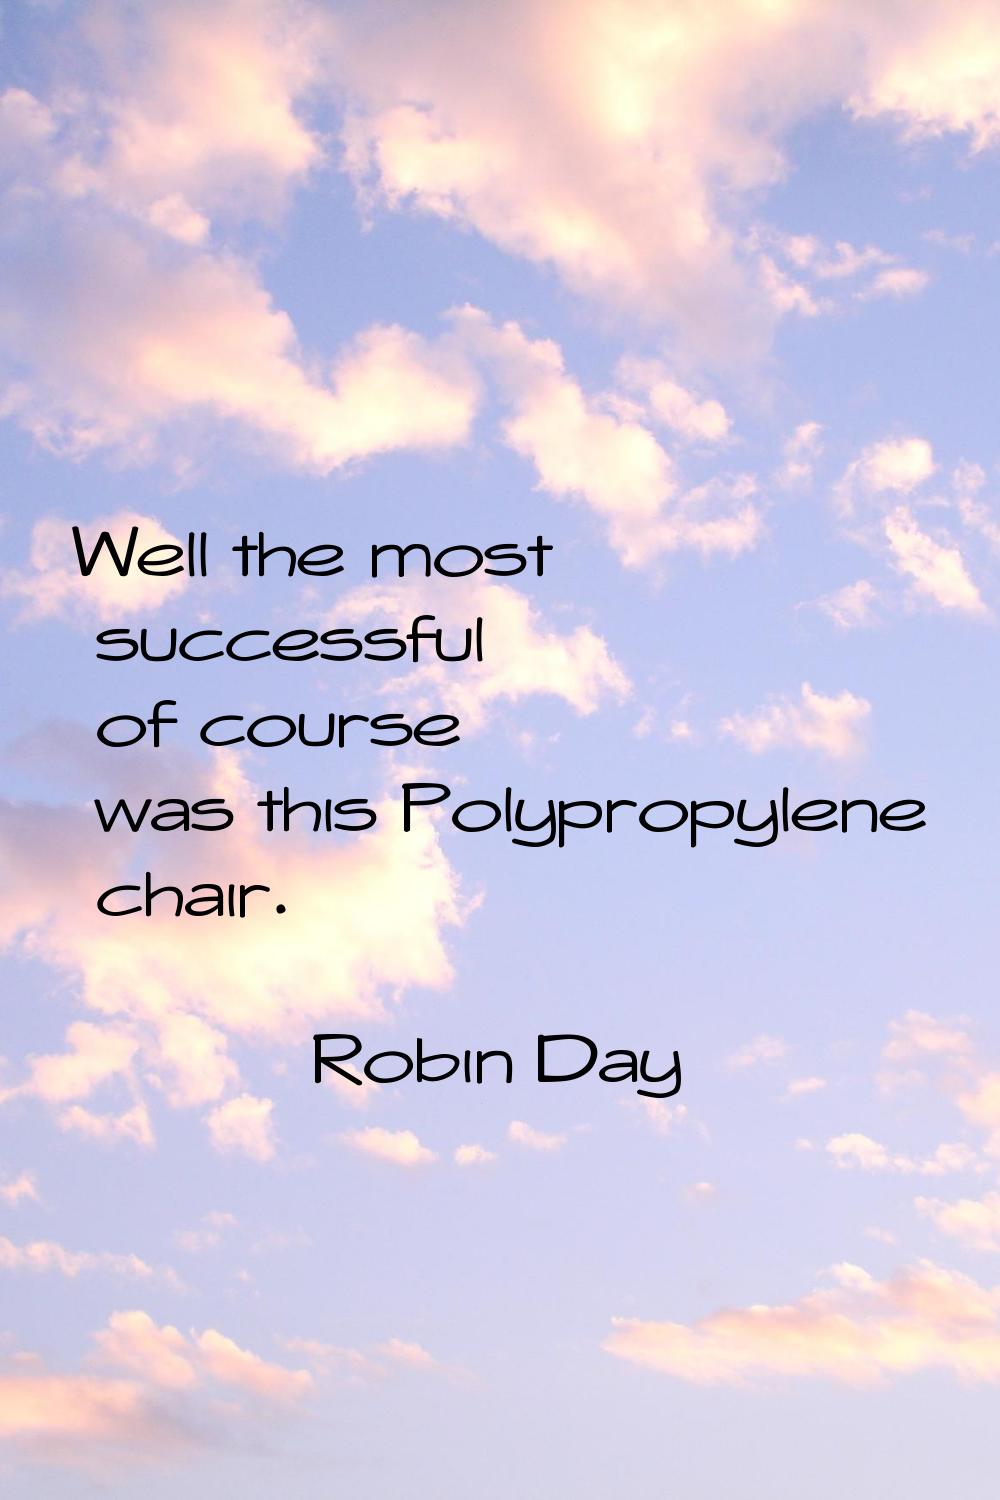 Well the most successful of course was this Polypropylene chair.